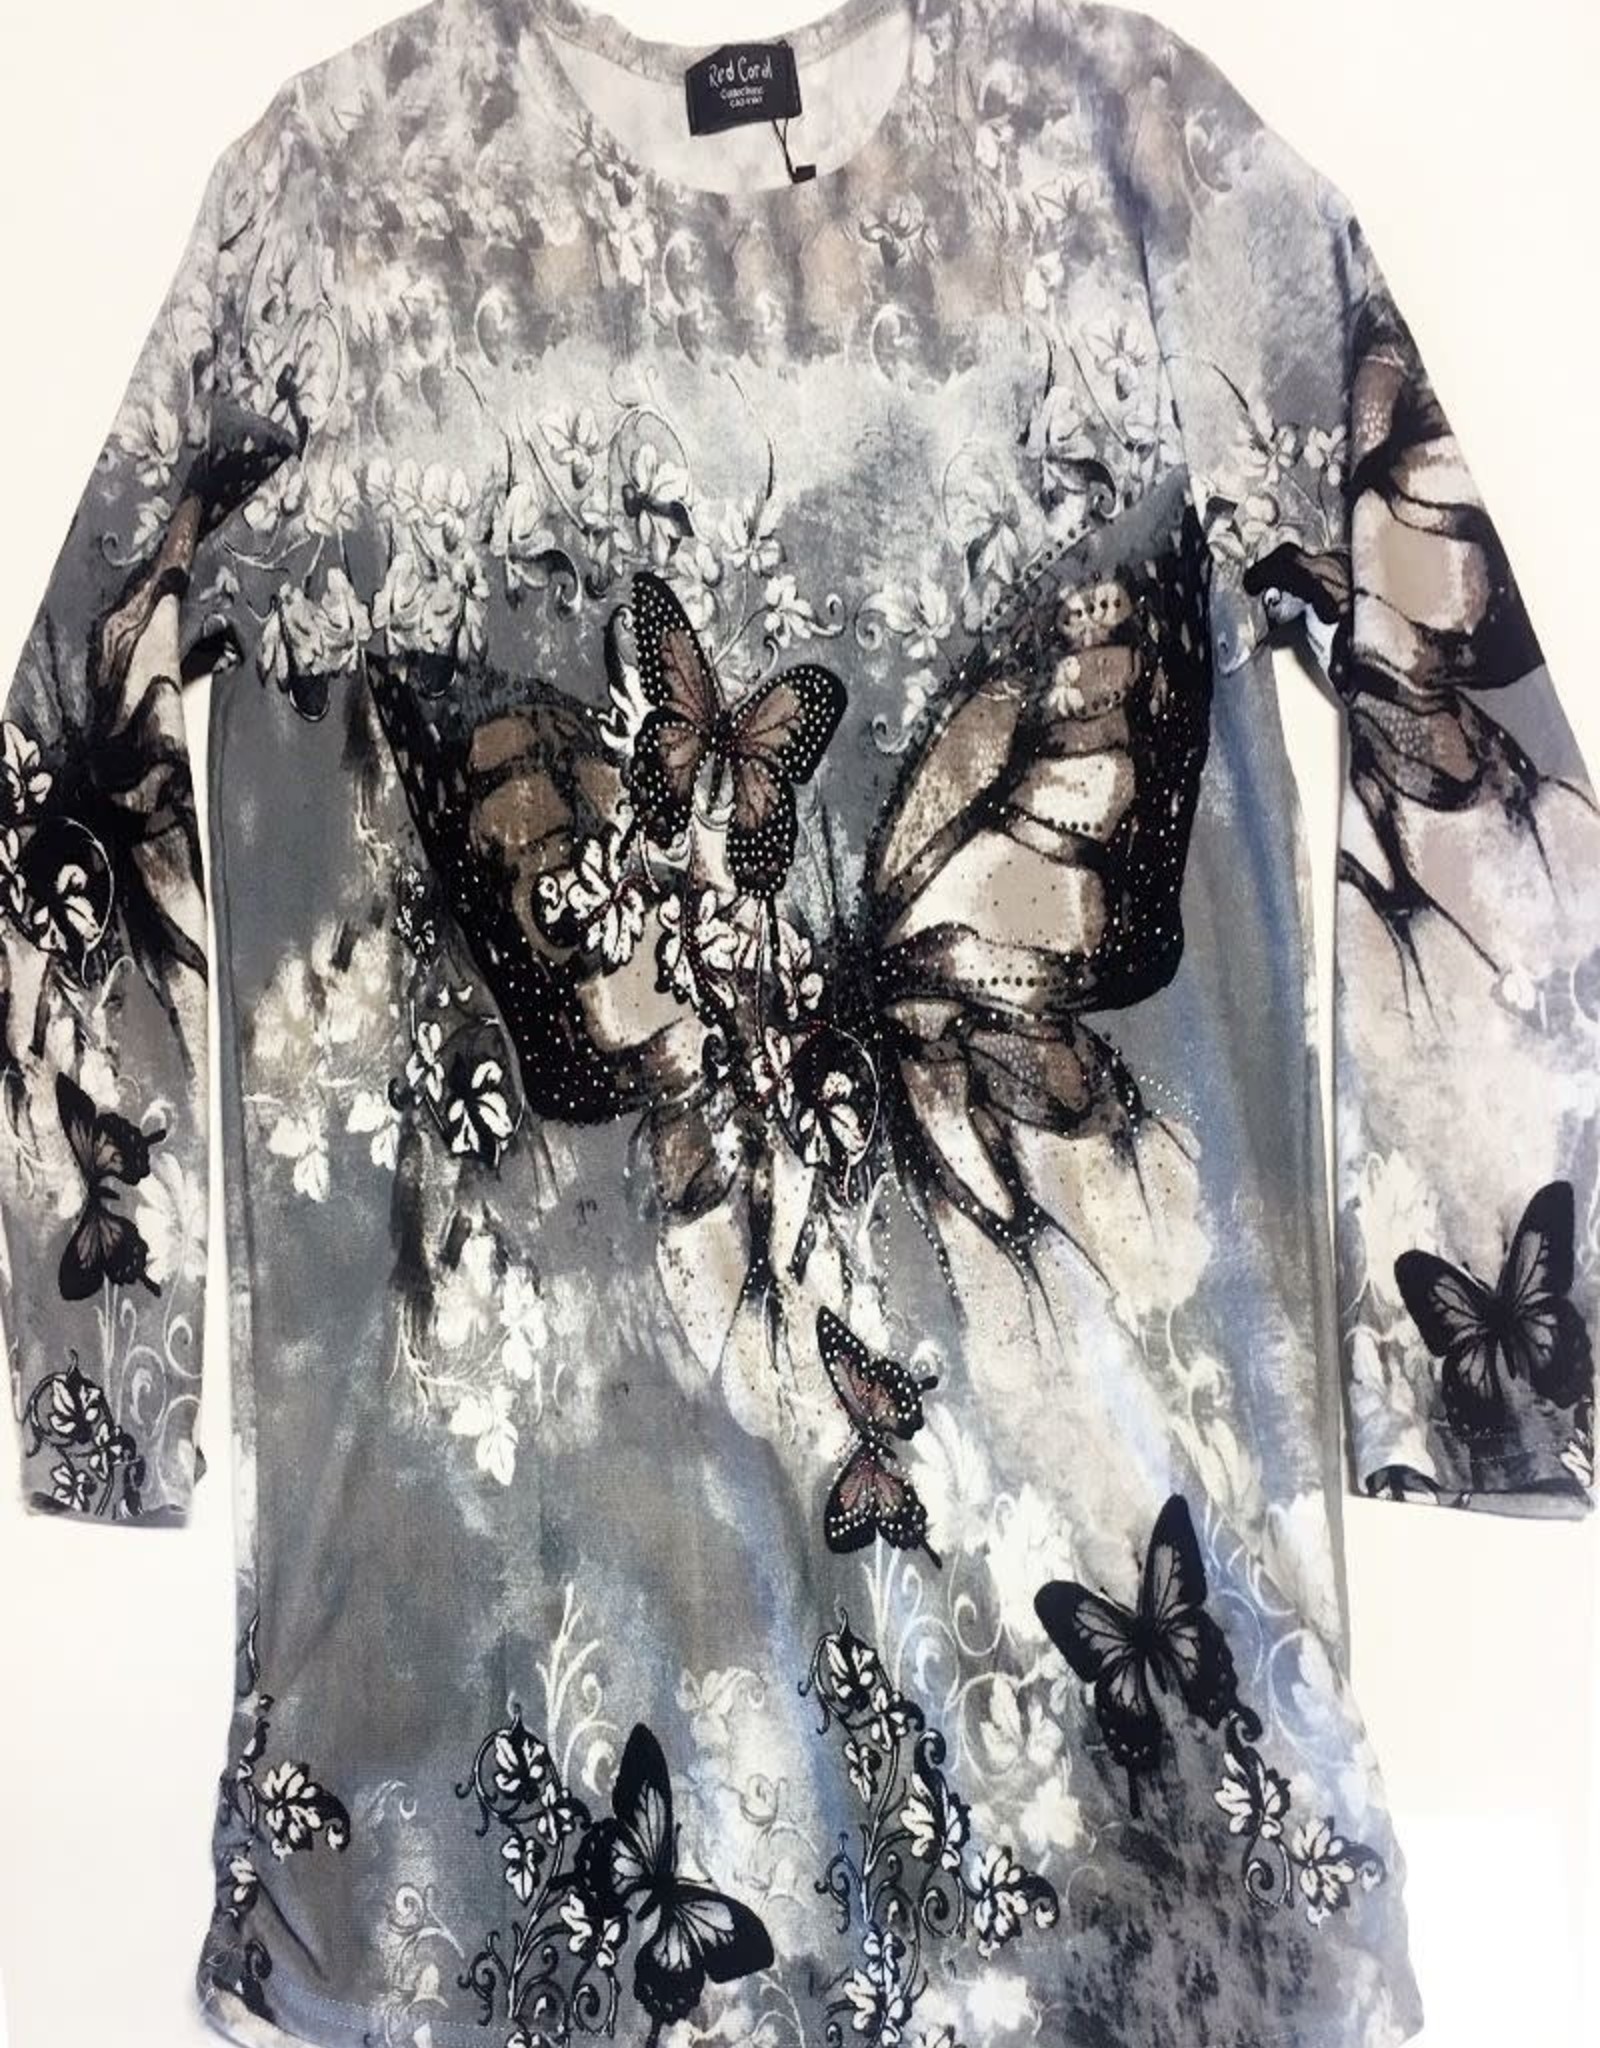 Embellished Butterflies Print Tunic Top One Size